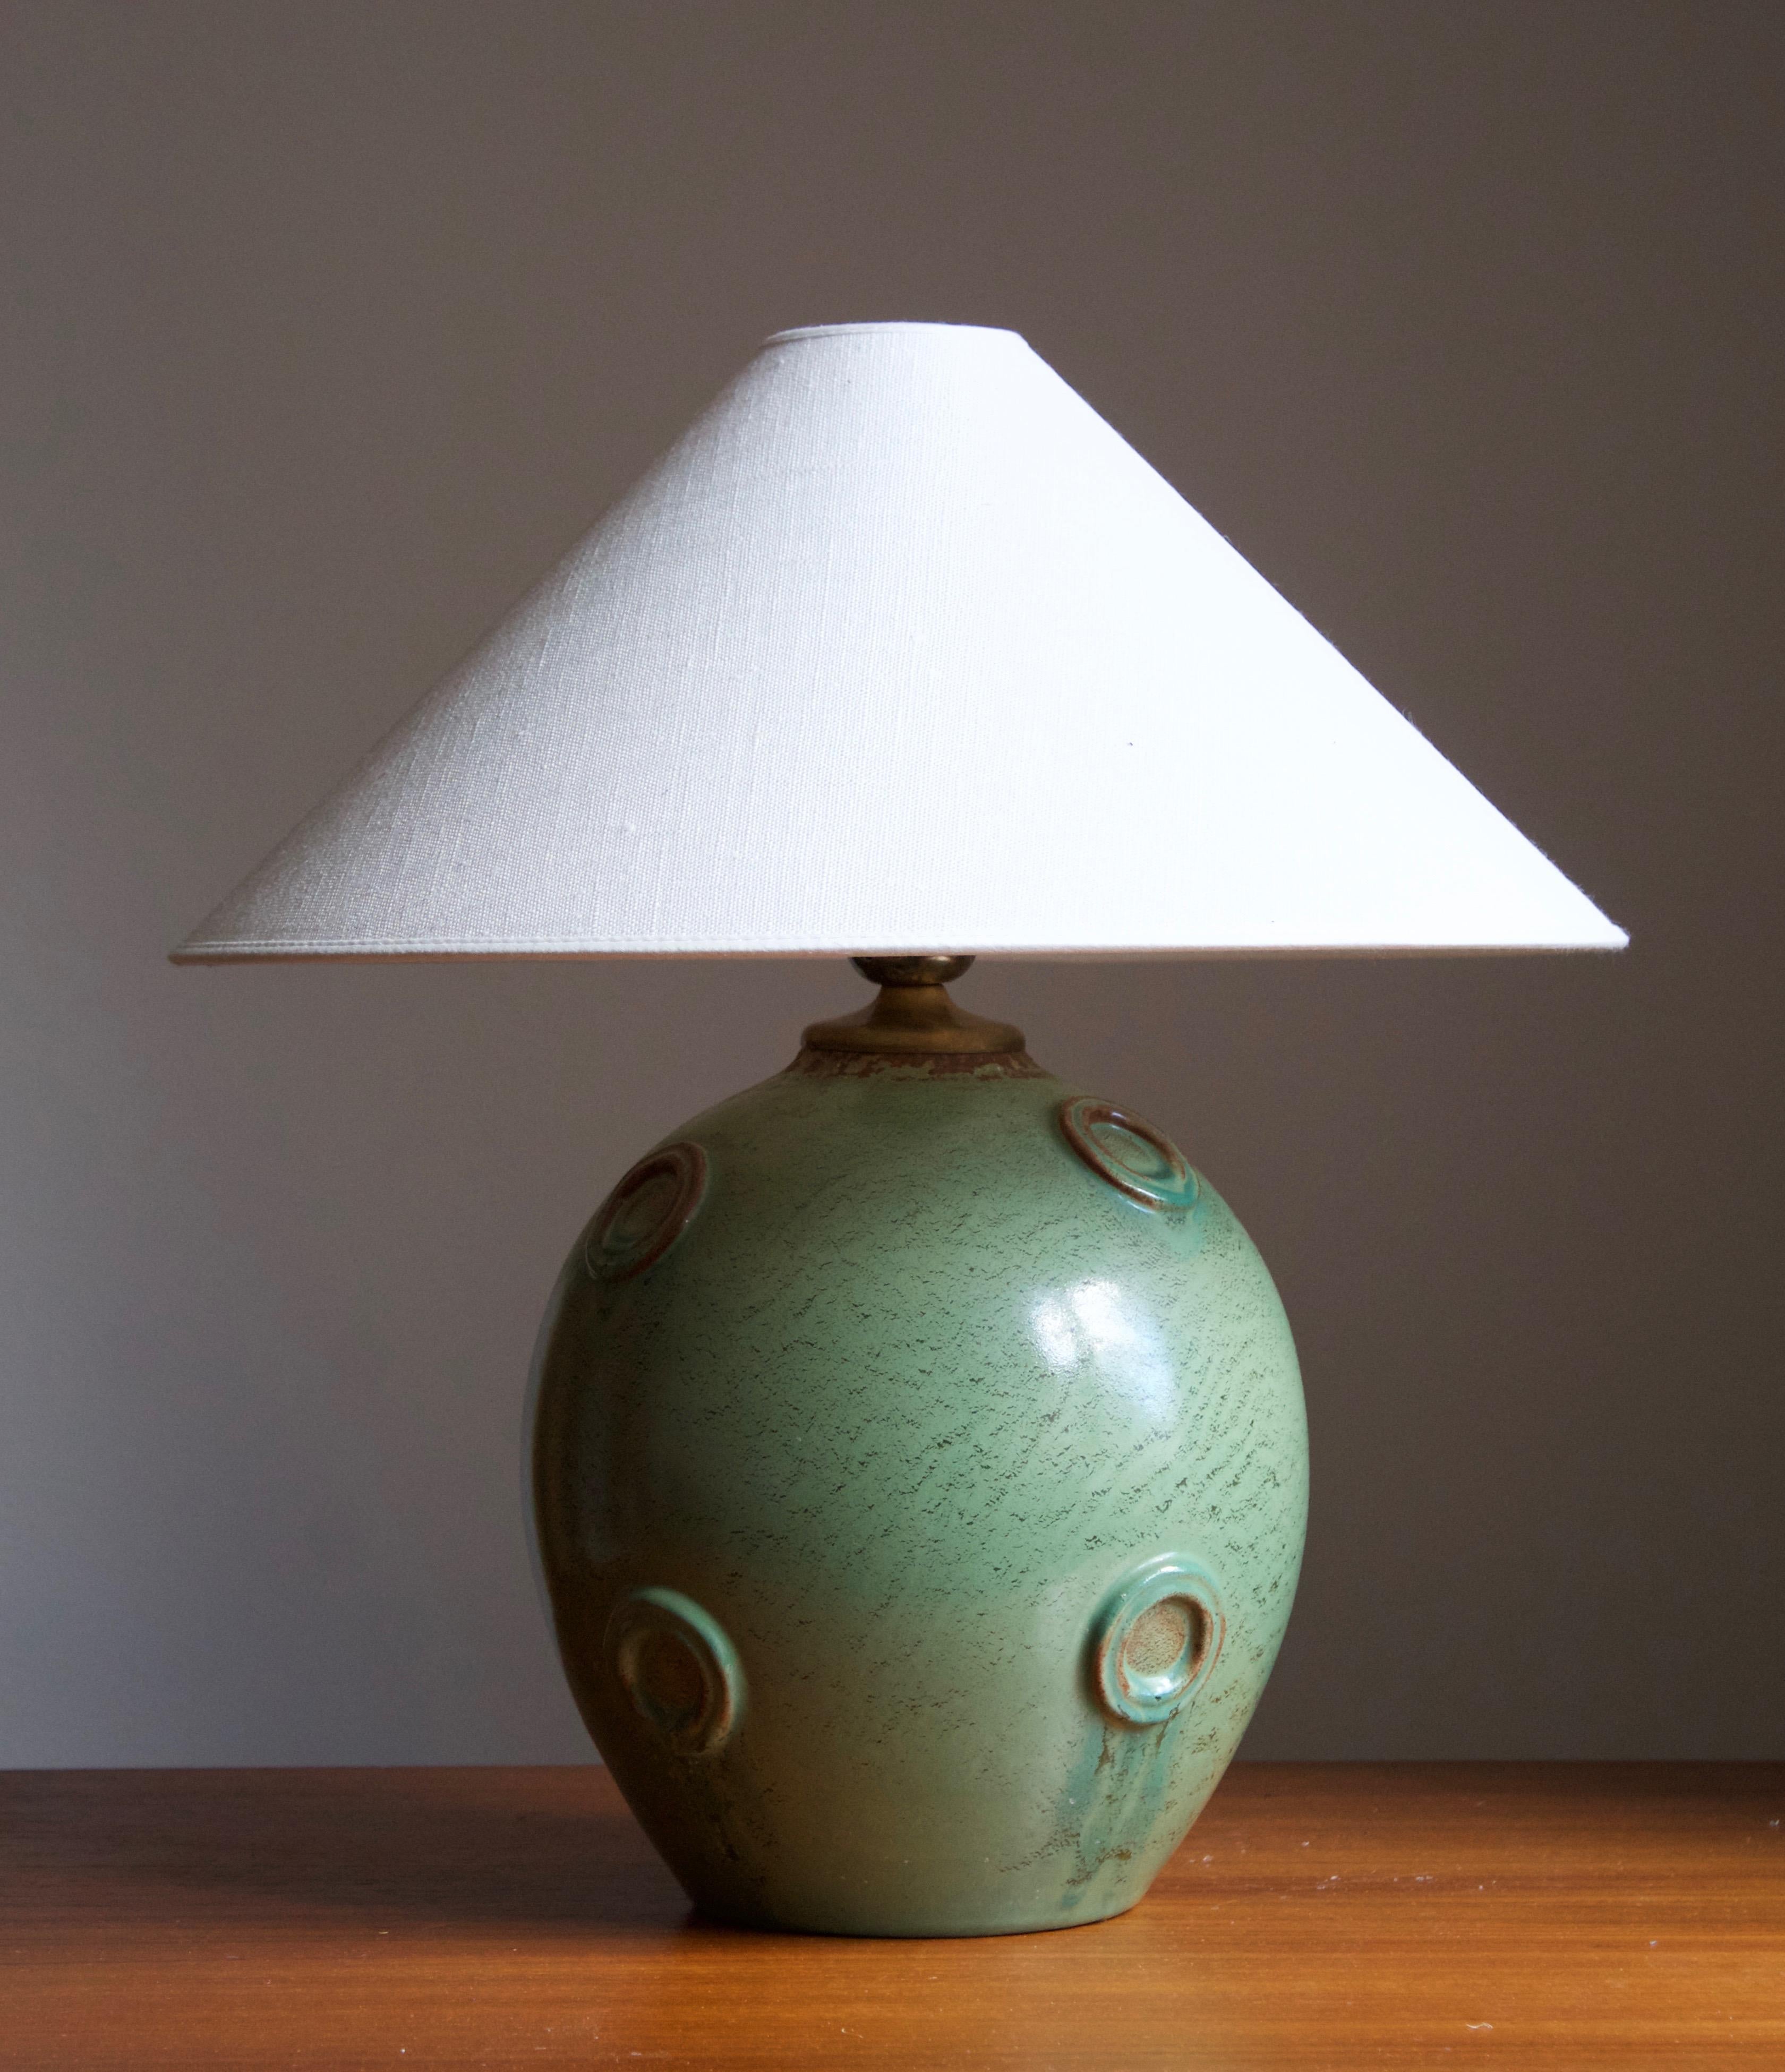 A large modernist table lamp designed by Jerk Werkmäster. Produced by Nittsjö, Sweden, 1930s. Stamped.

Stated dimensions exclude the lampshade. Sold without lampshade.

Glaze features a green color with hints of brown.

Other designers of the